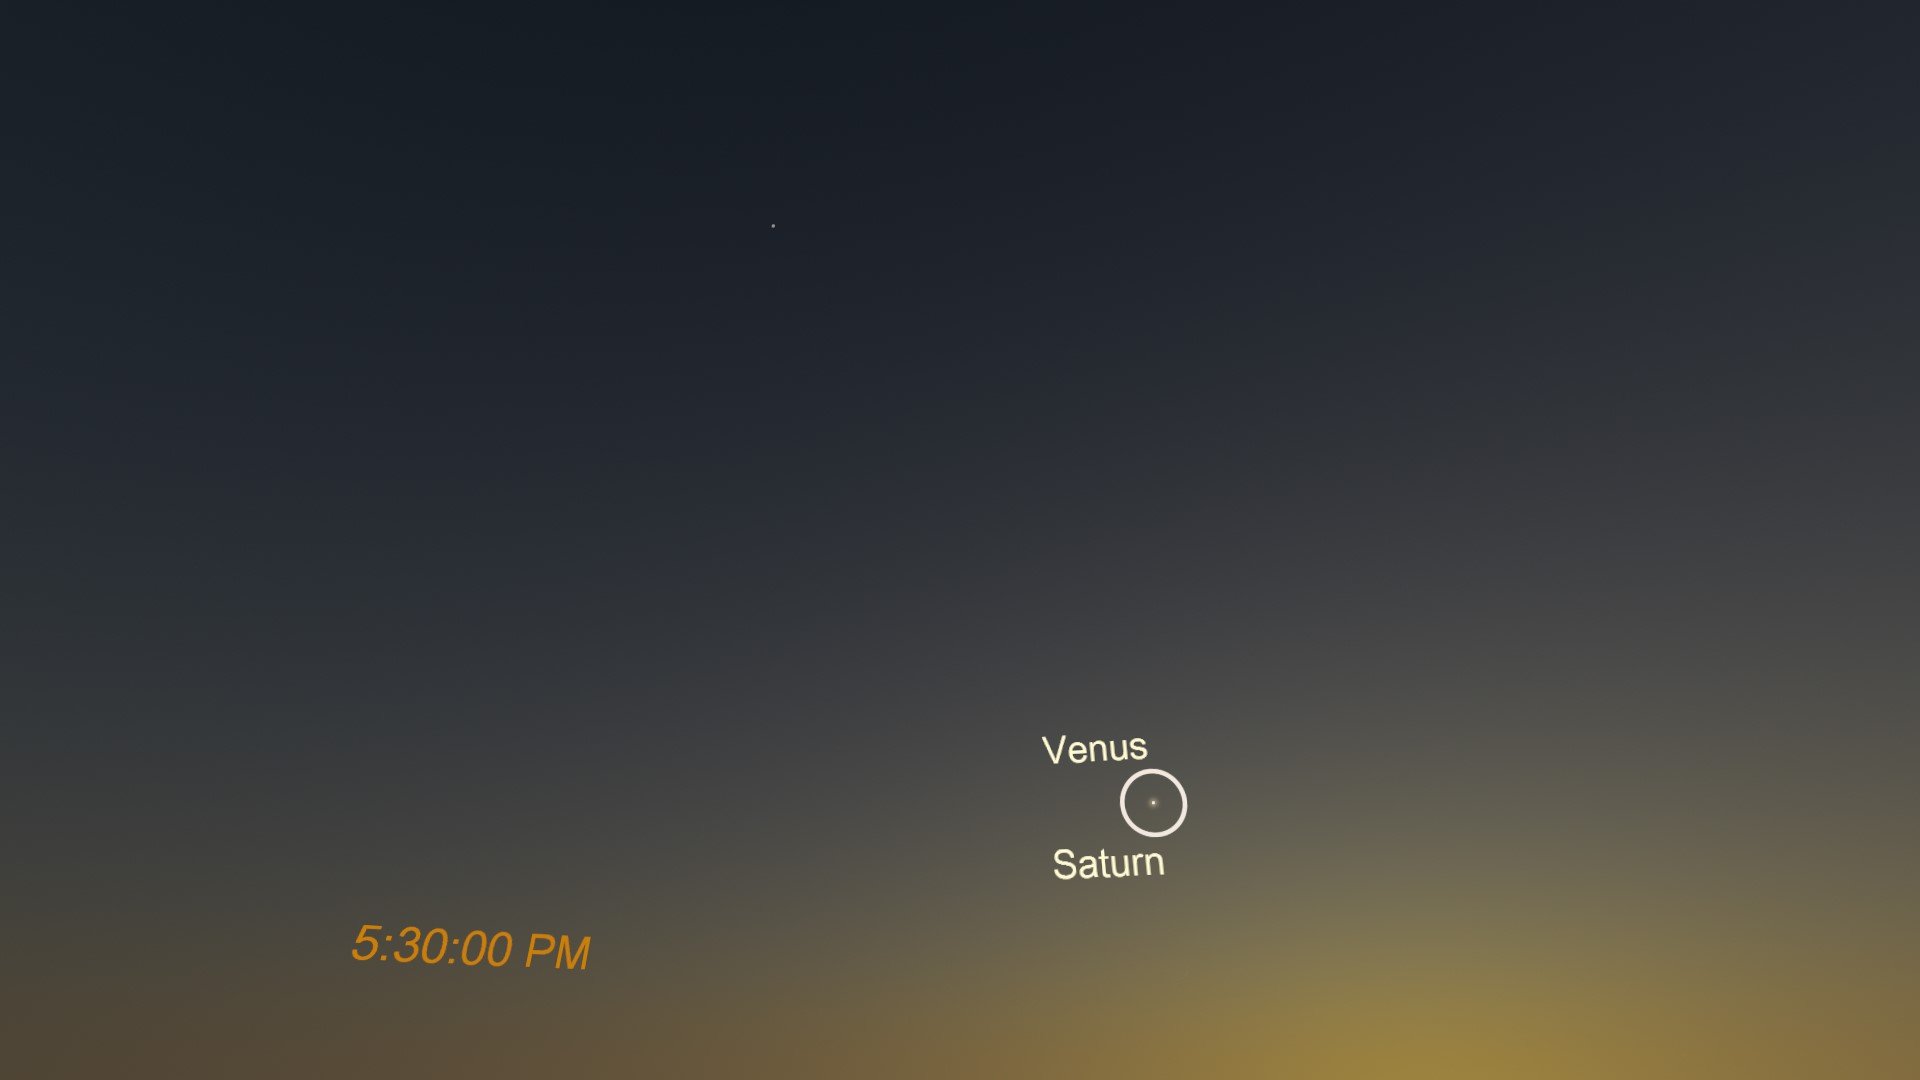 Venus and Saturn are located on the same part of the sky just after sunset on January 22.